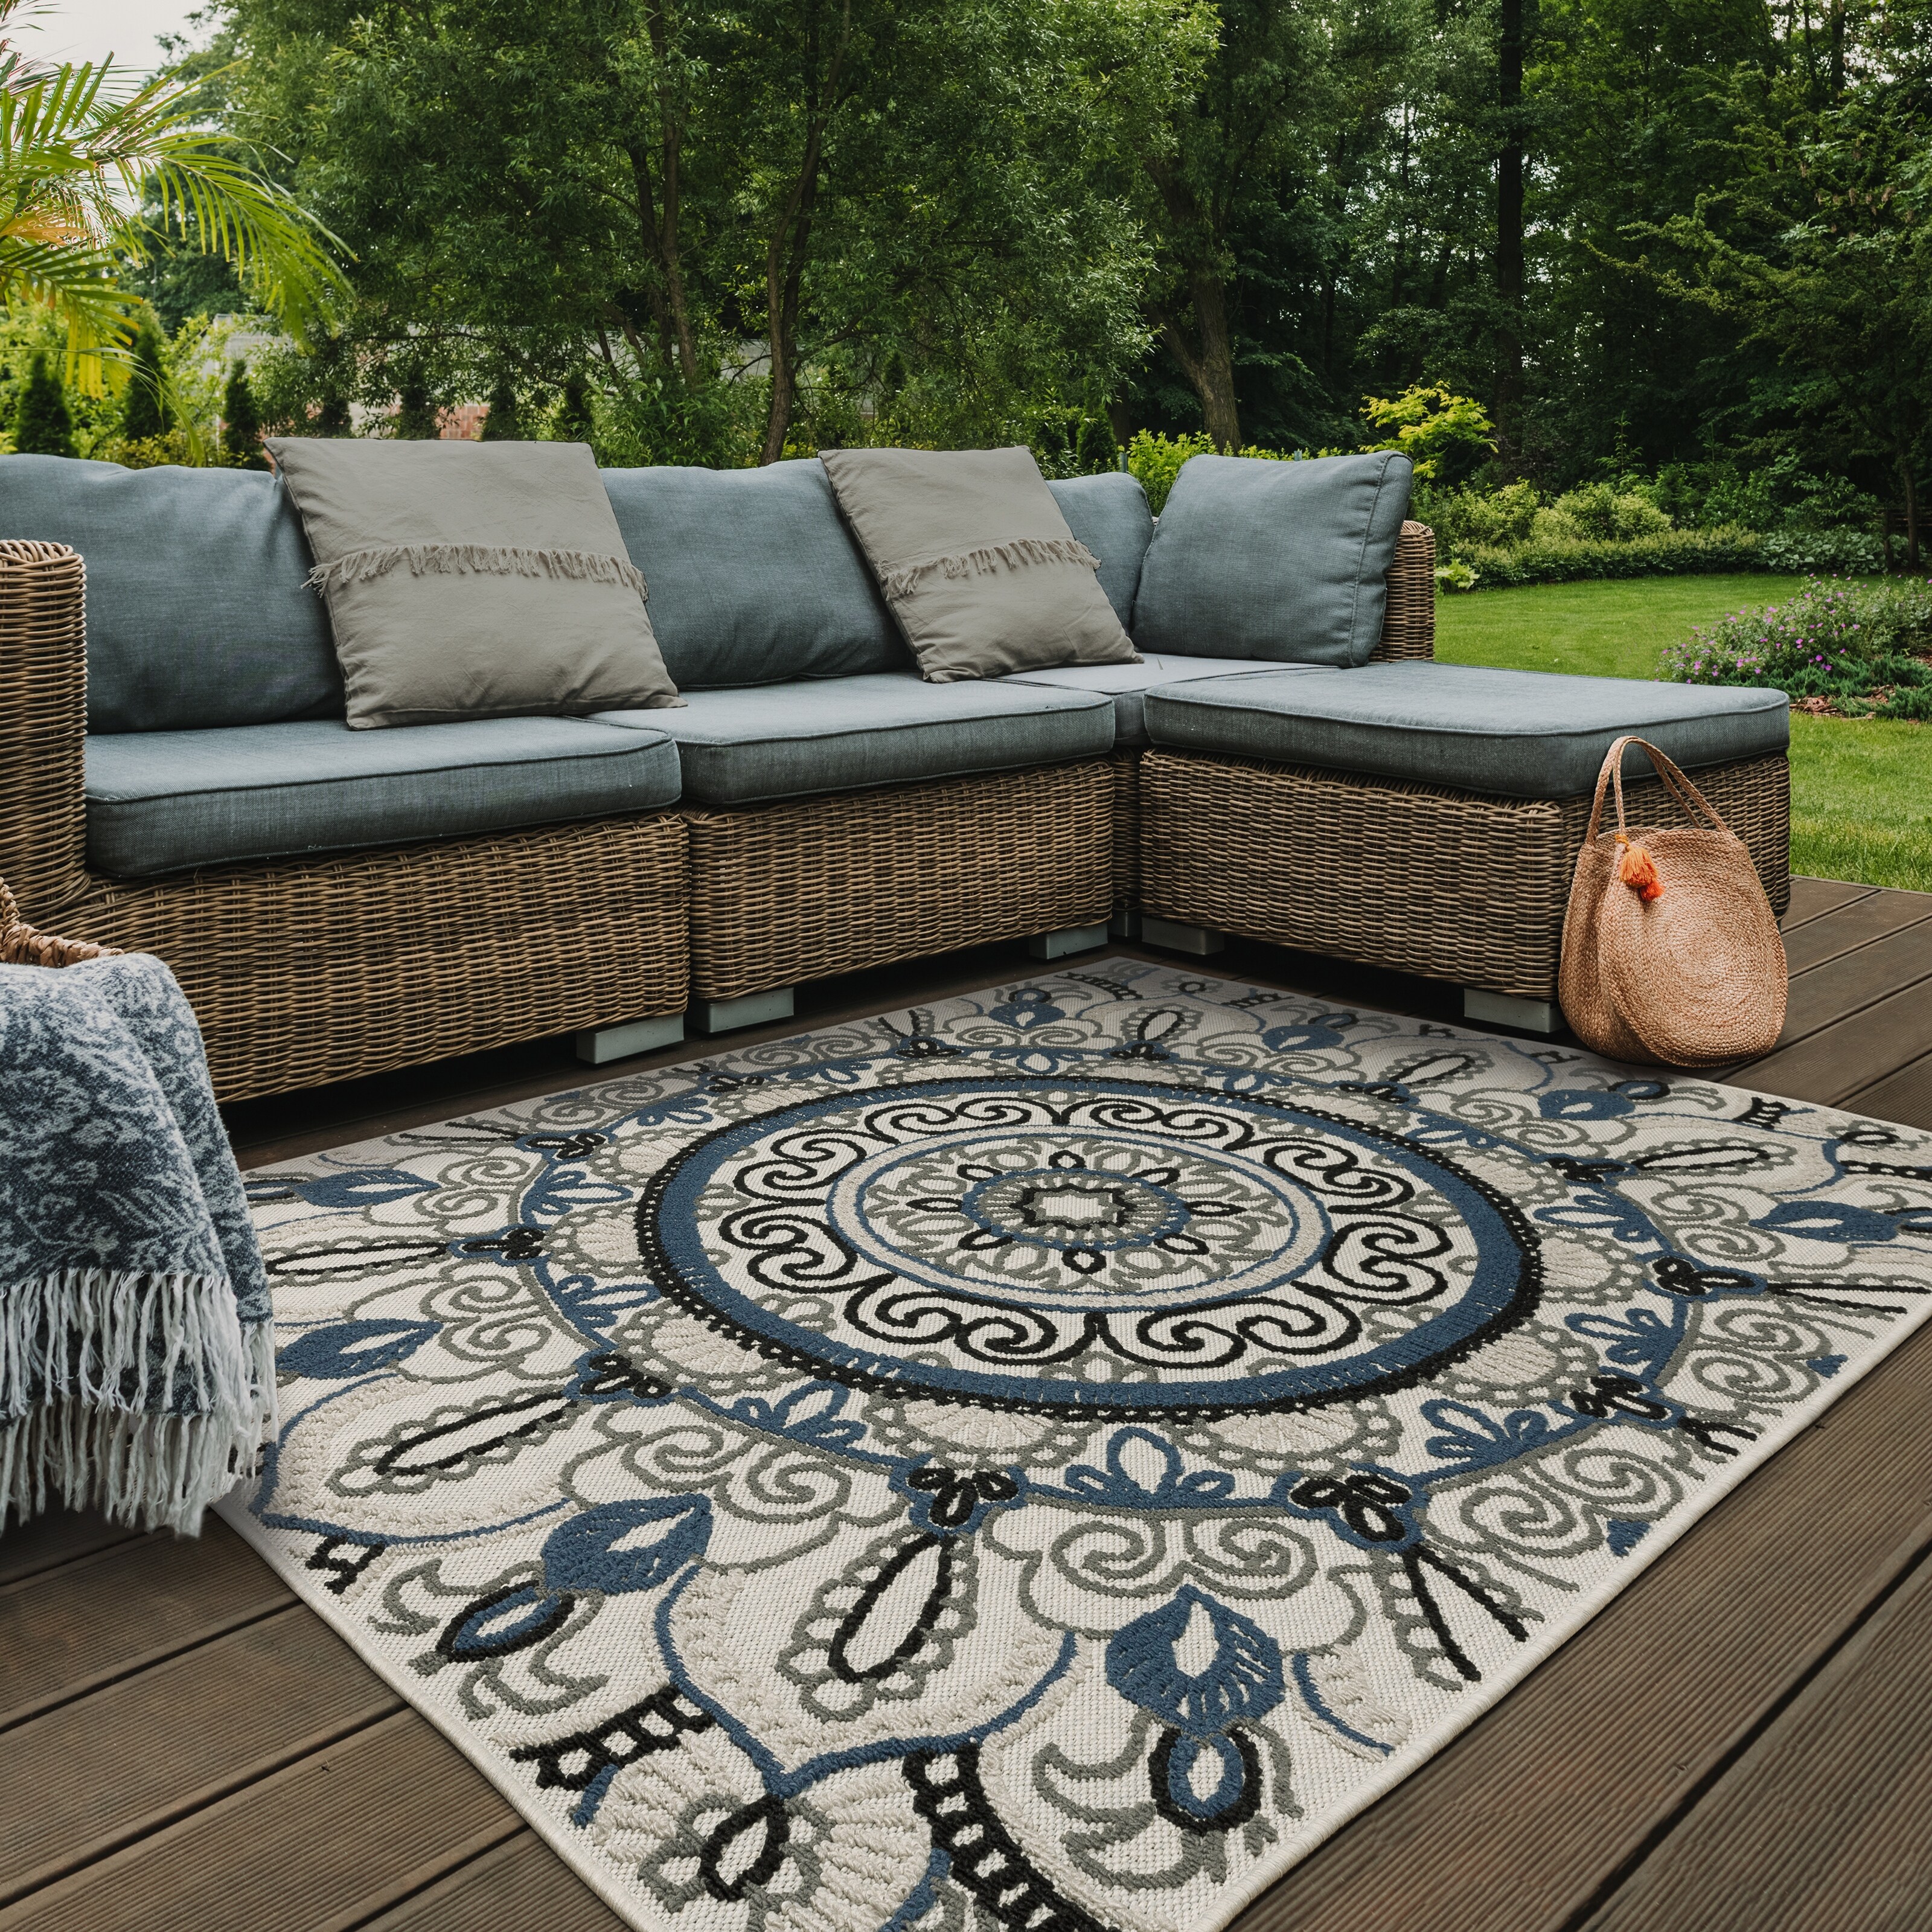 https://ak1.ostkcdn.com/images/products/is/images/direct/7a4d1425453e932f82614a1aa43ec01ffa416bdc/Talcot-Bohemian-Medallion-Gray-Blue-Indoor-Outdoor-Area-Rug.jpg